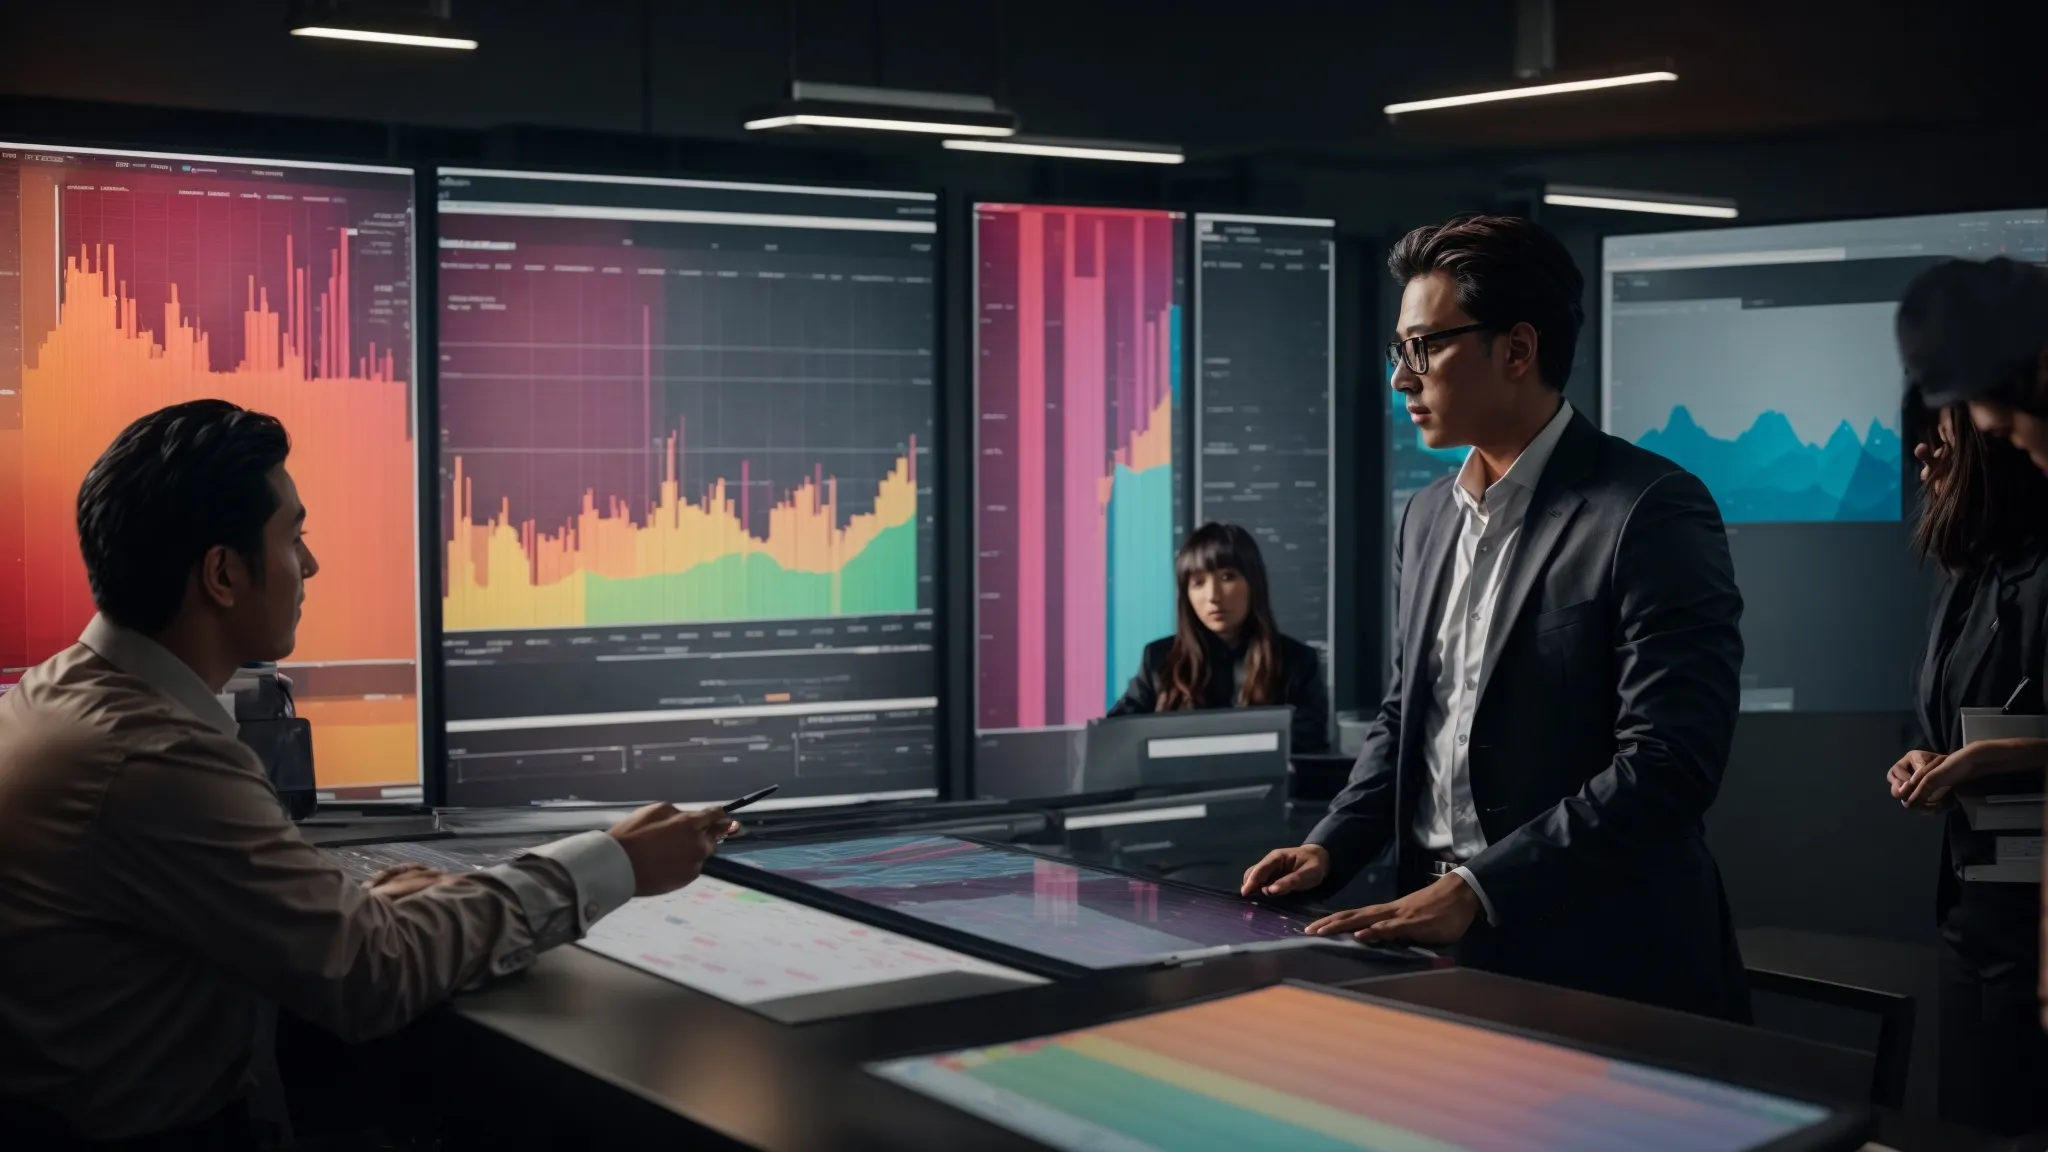 a marketing team analyzes data on a large screen displaying colorful charts and graphs while discussing a strategy.